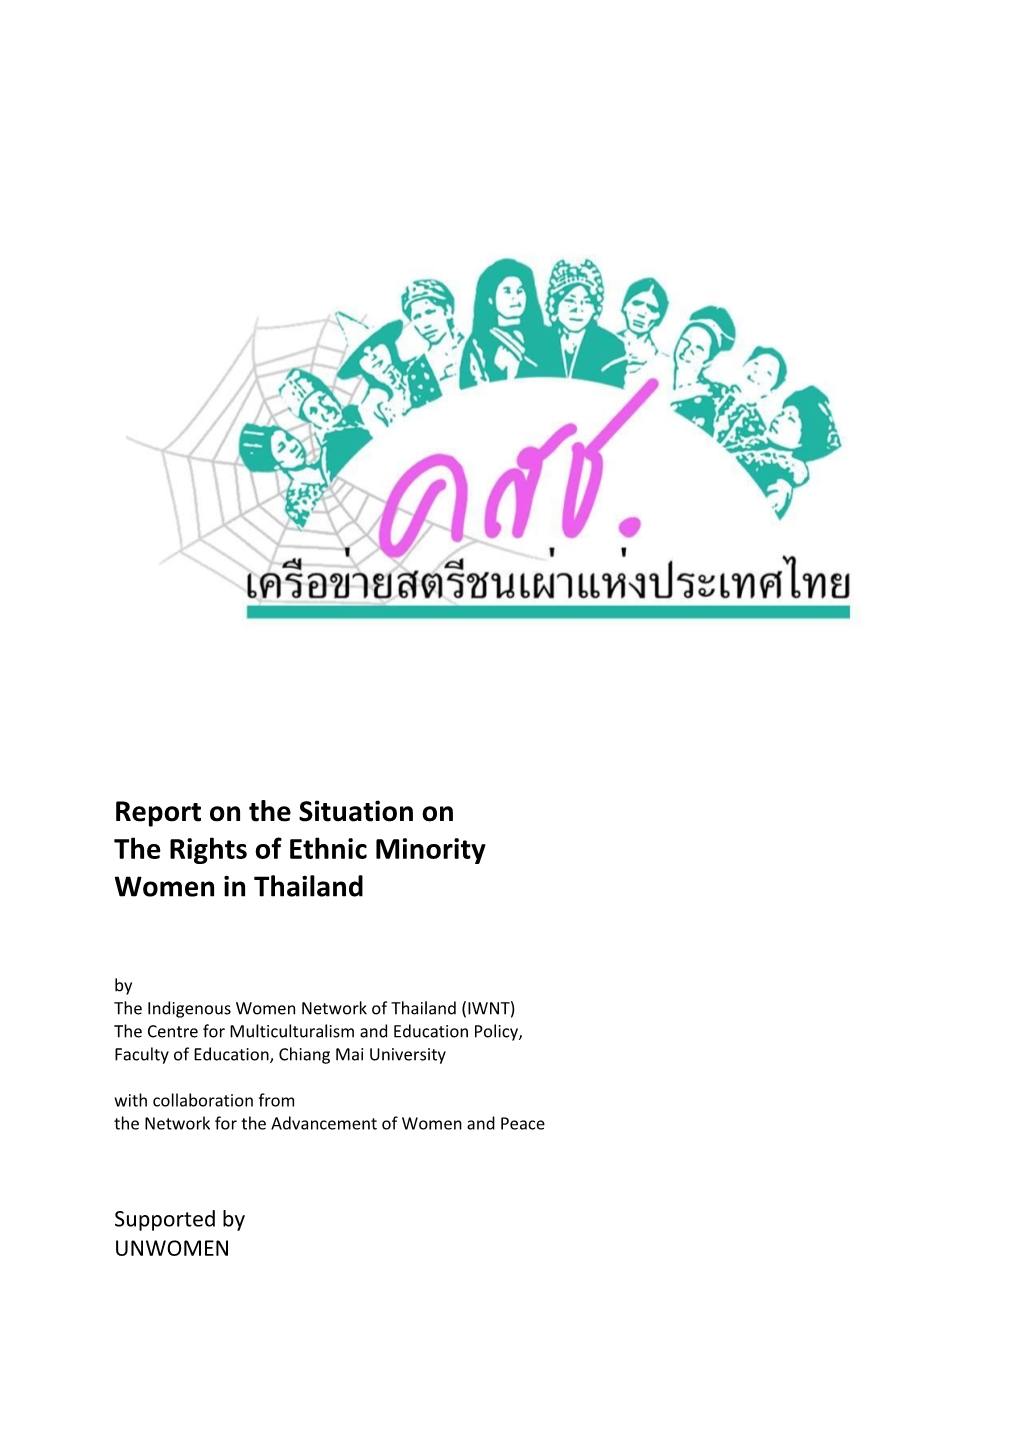 Report on the Situation on the Rights of Ethnic Minority Women in Thailand